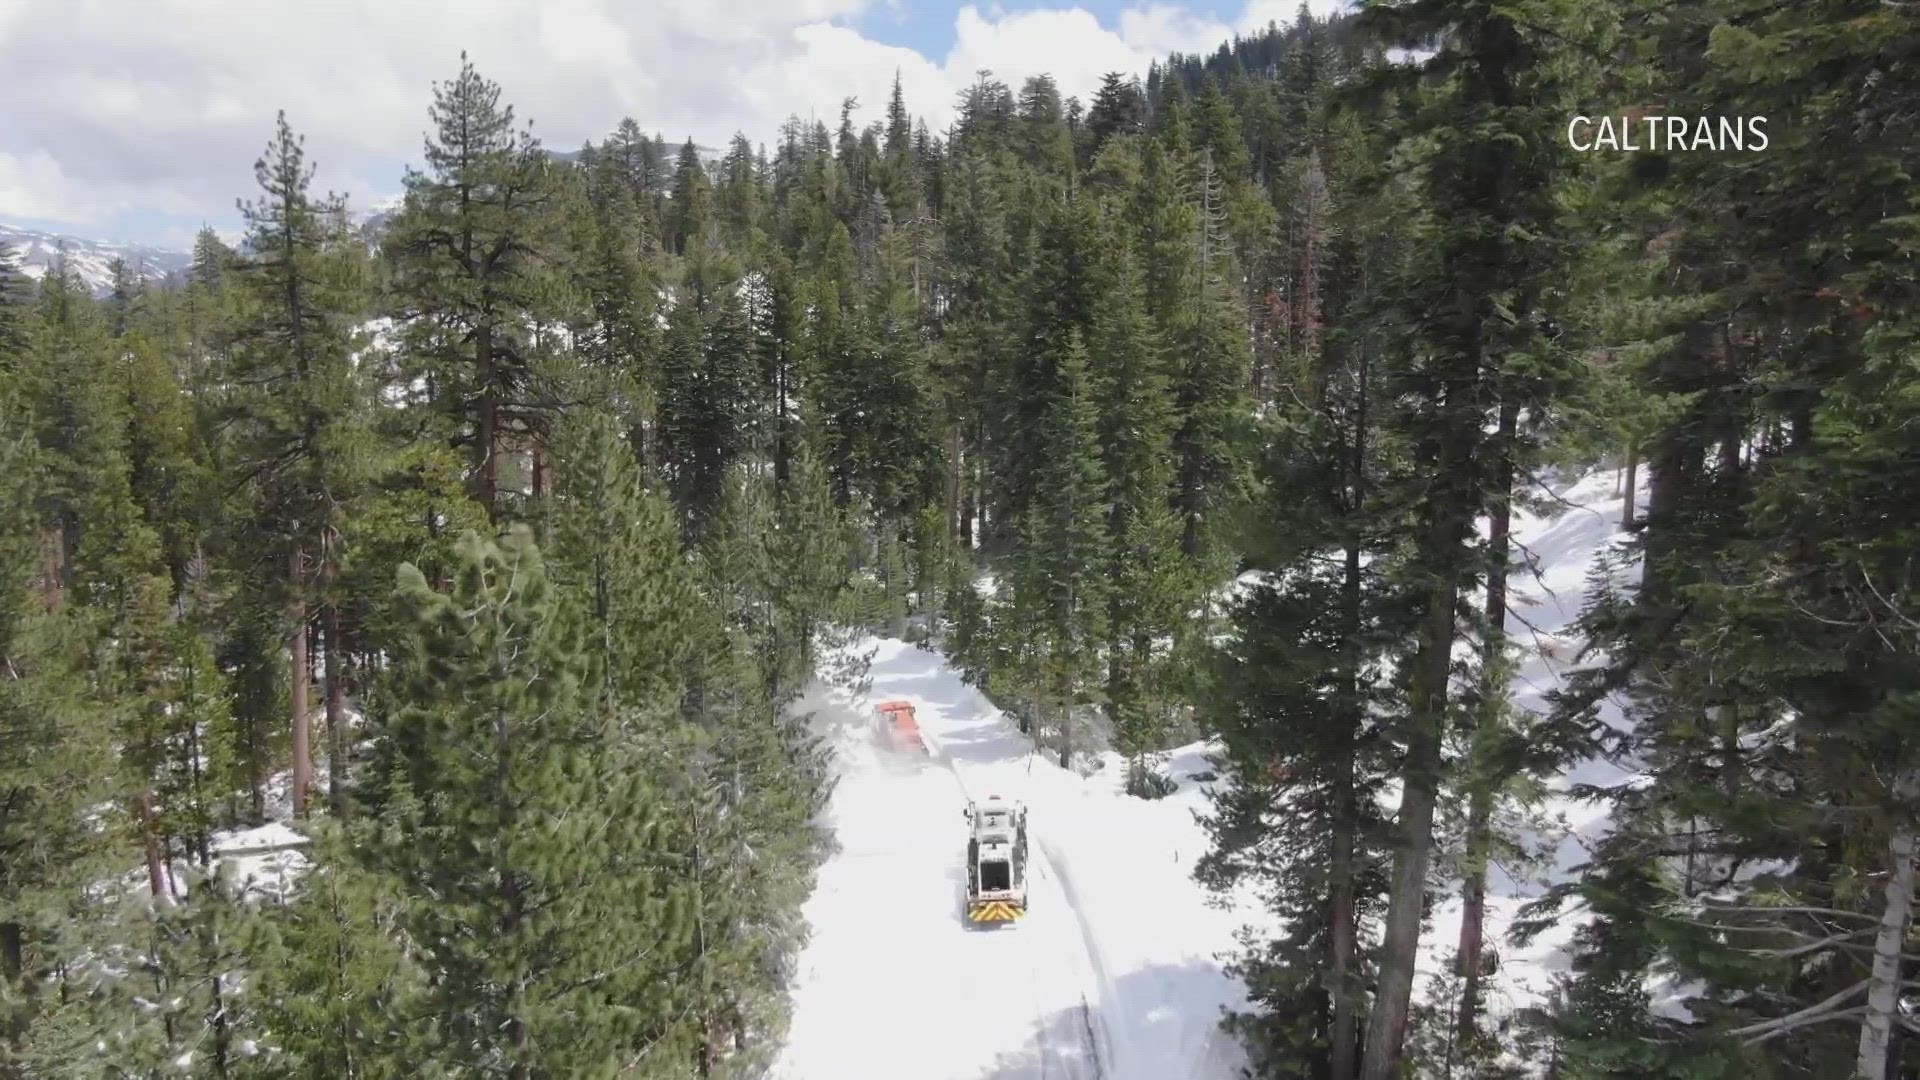 Highway 108 is weeks behind a normal opening schedule, having cleared only seven of the twenty miles needed to open the highway to Kennedy Meadows.